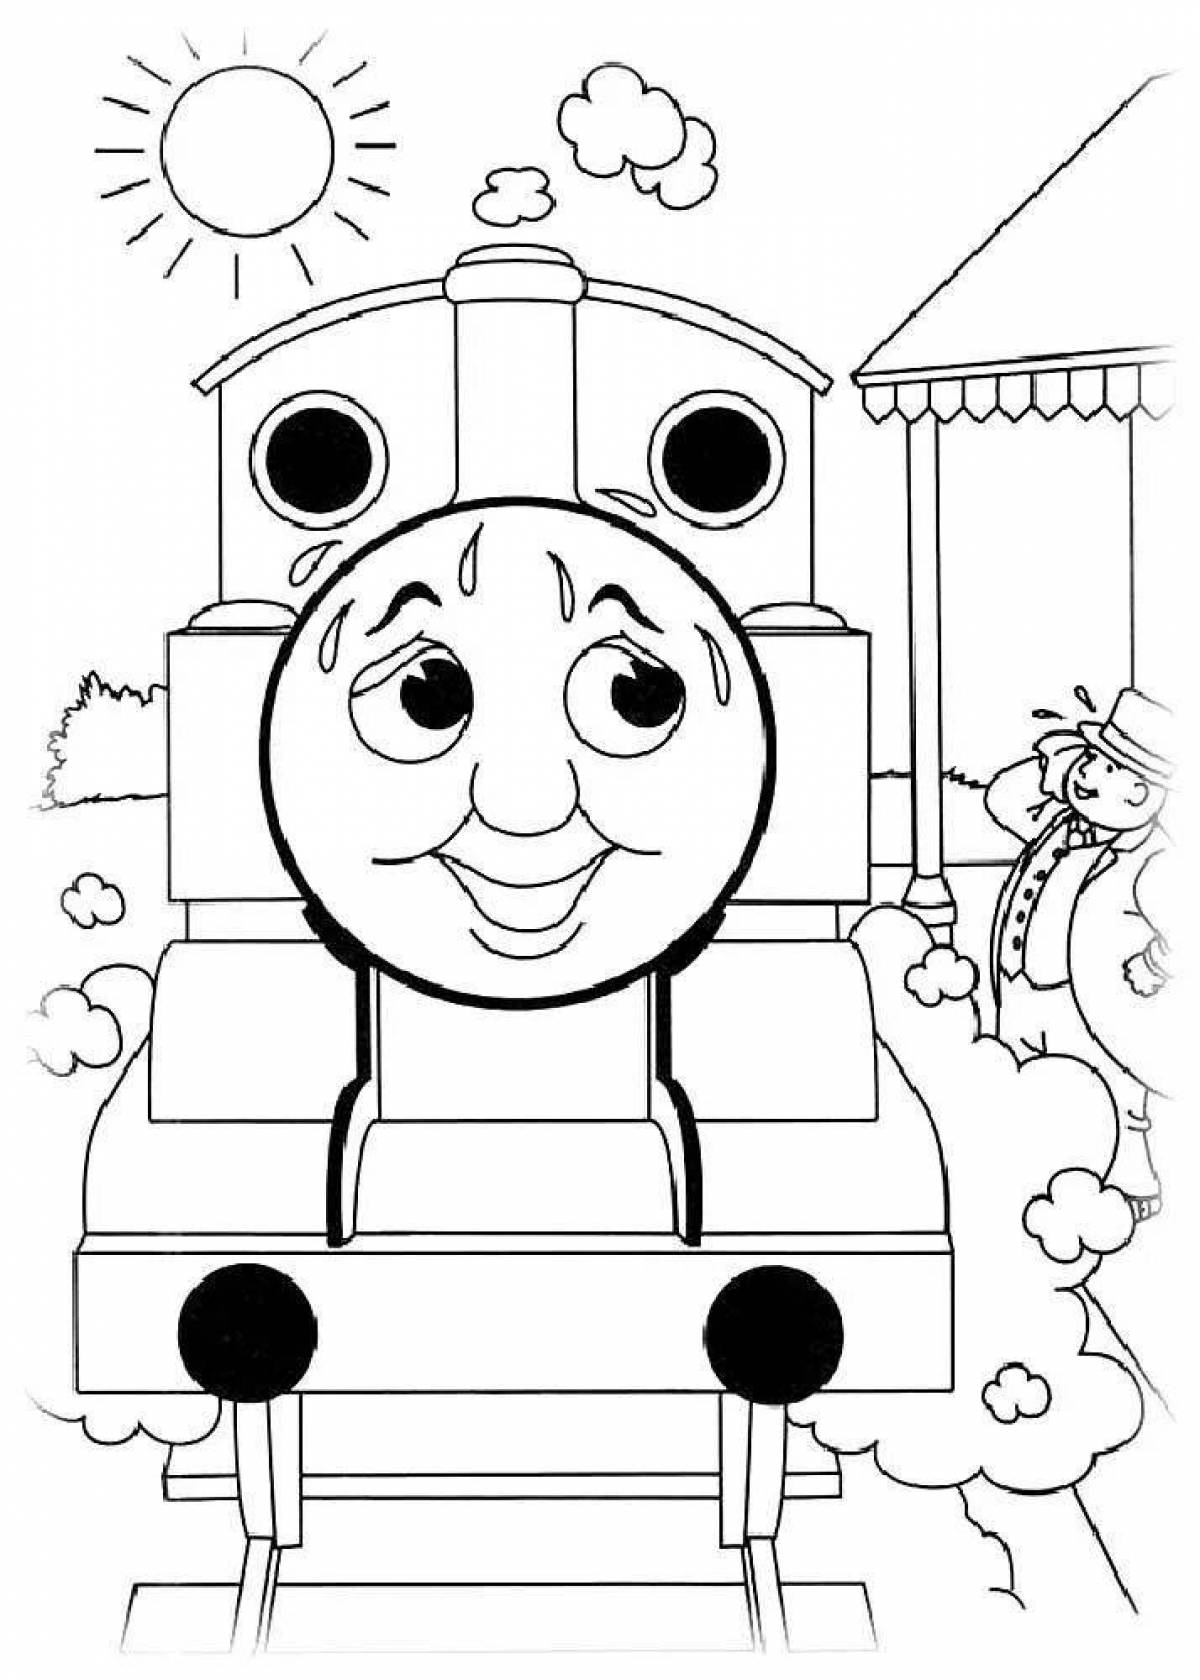 Thomas locomotive coloring page awesome